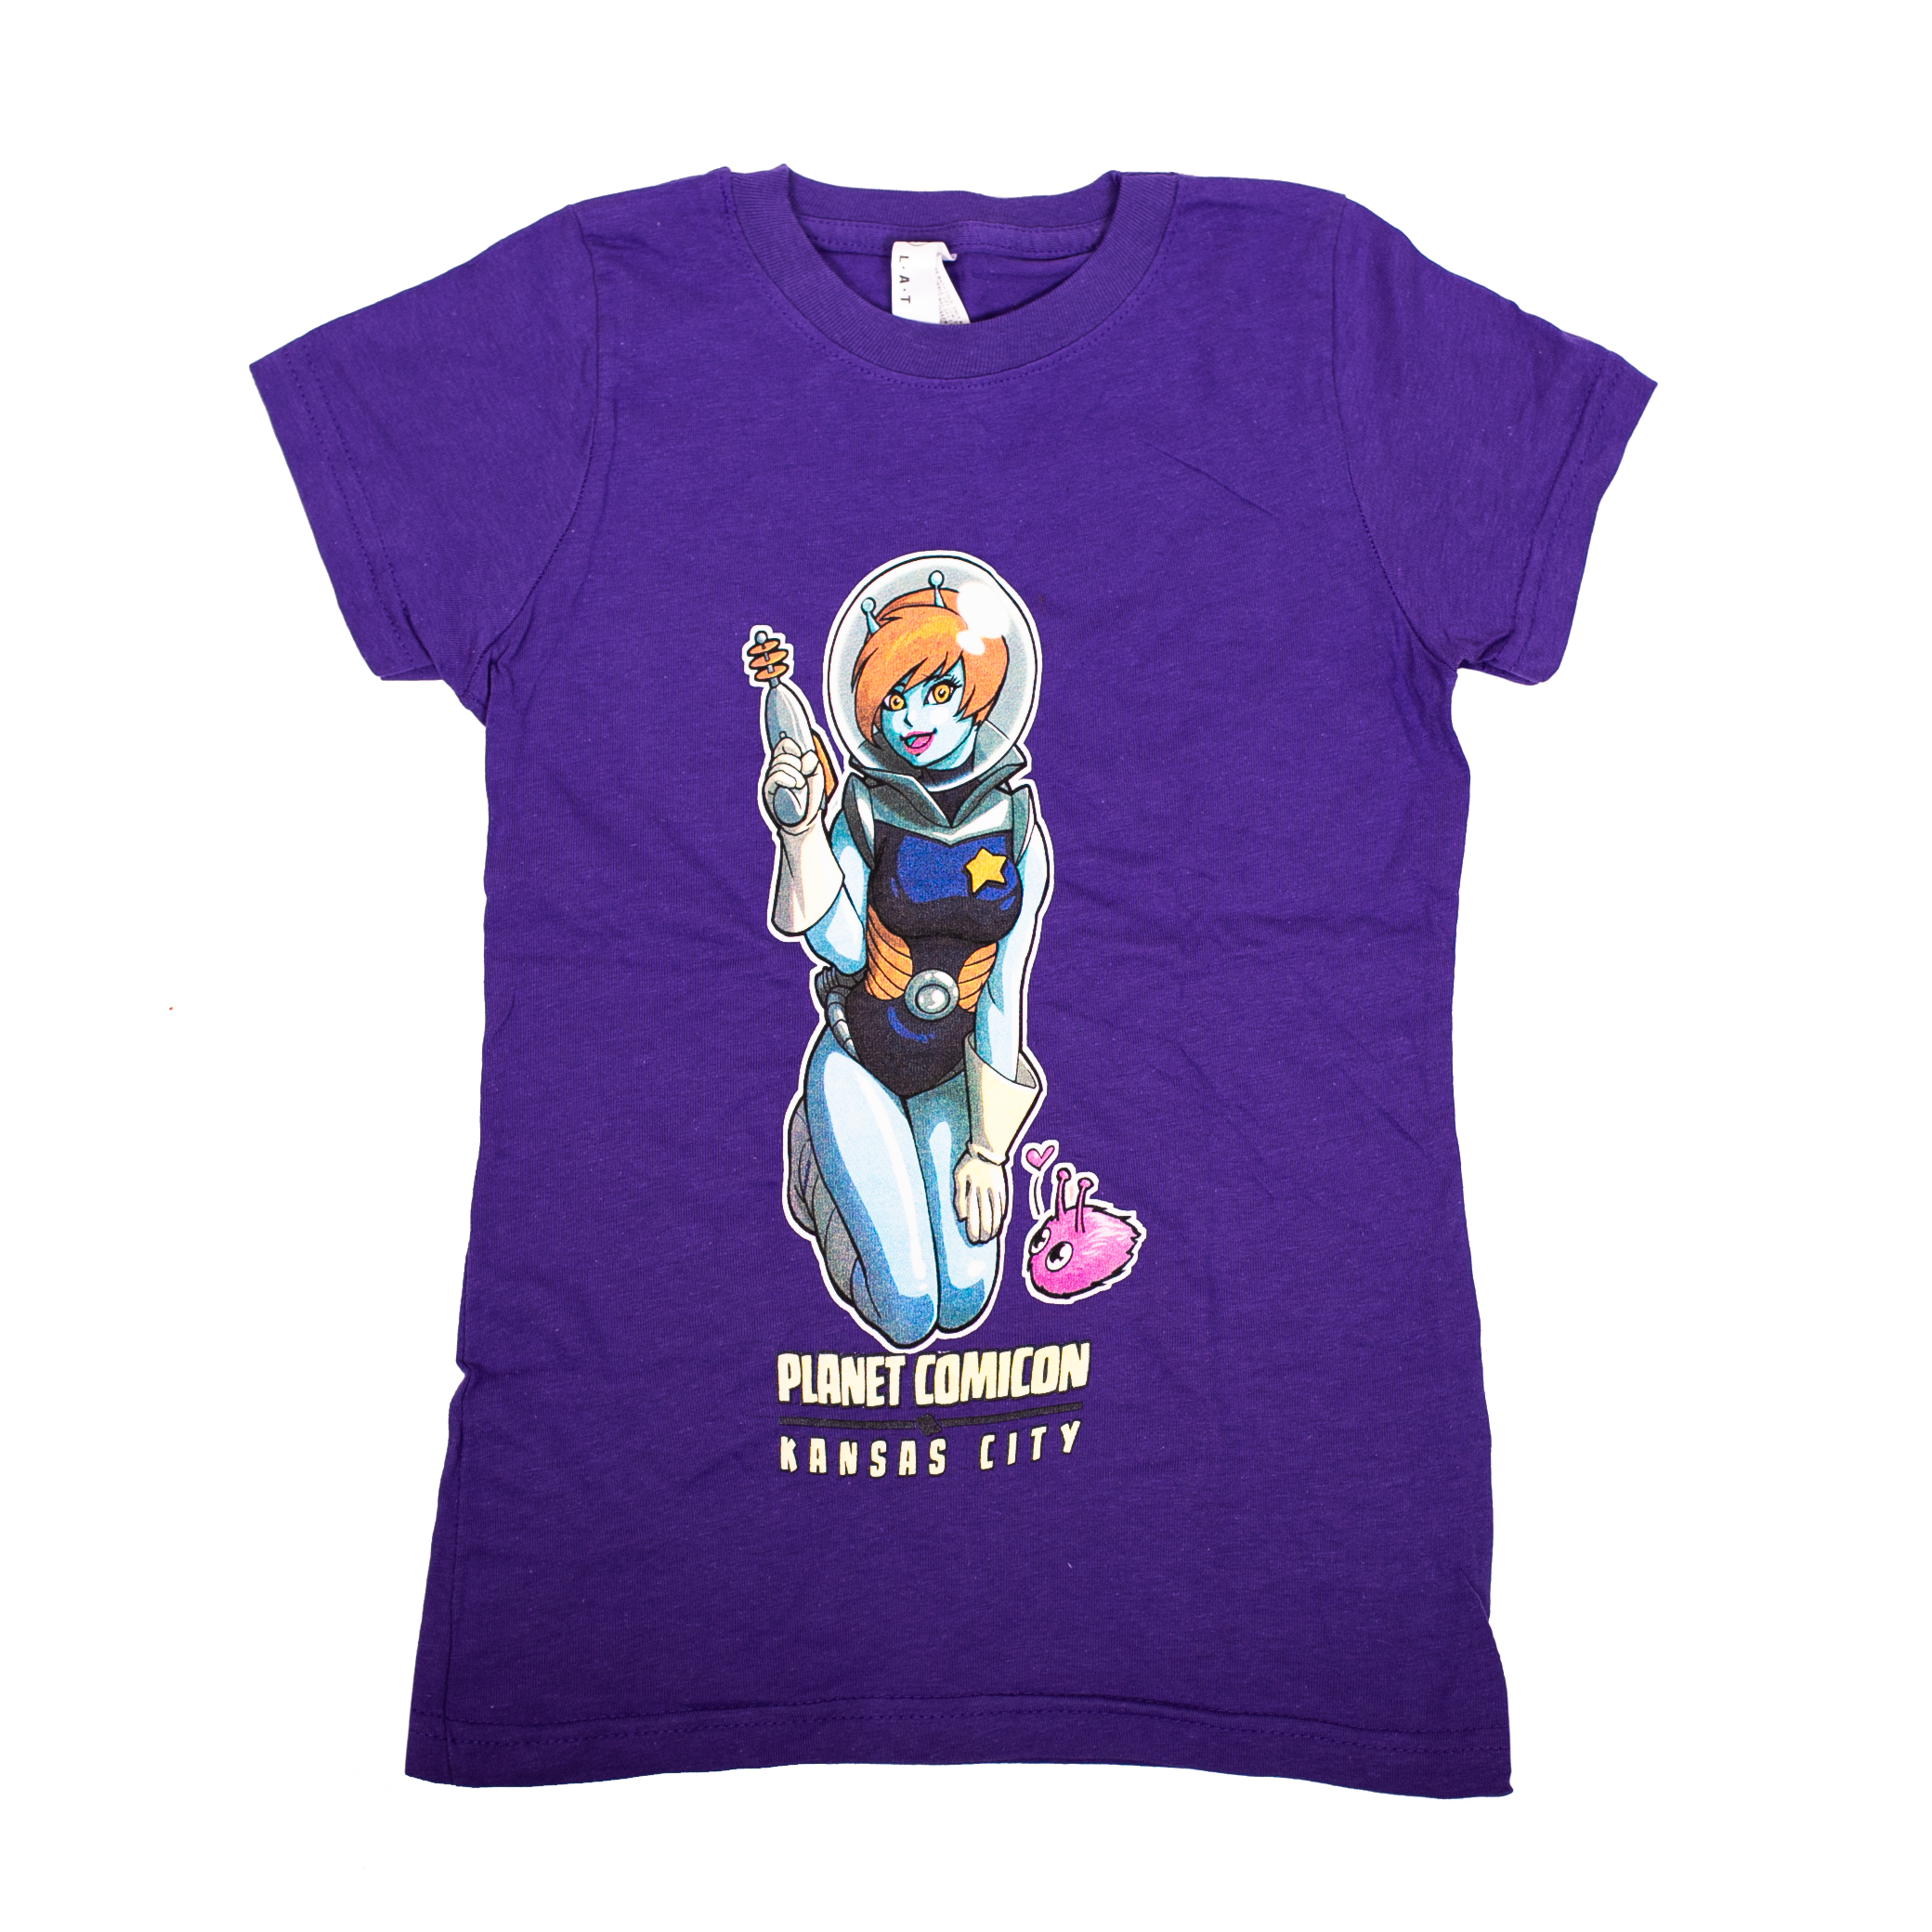 Planet Comicon | Space Girl Youth Girls T-Shirt